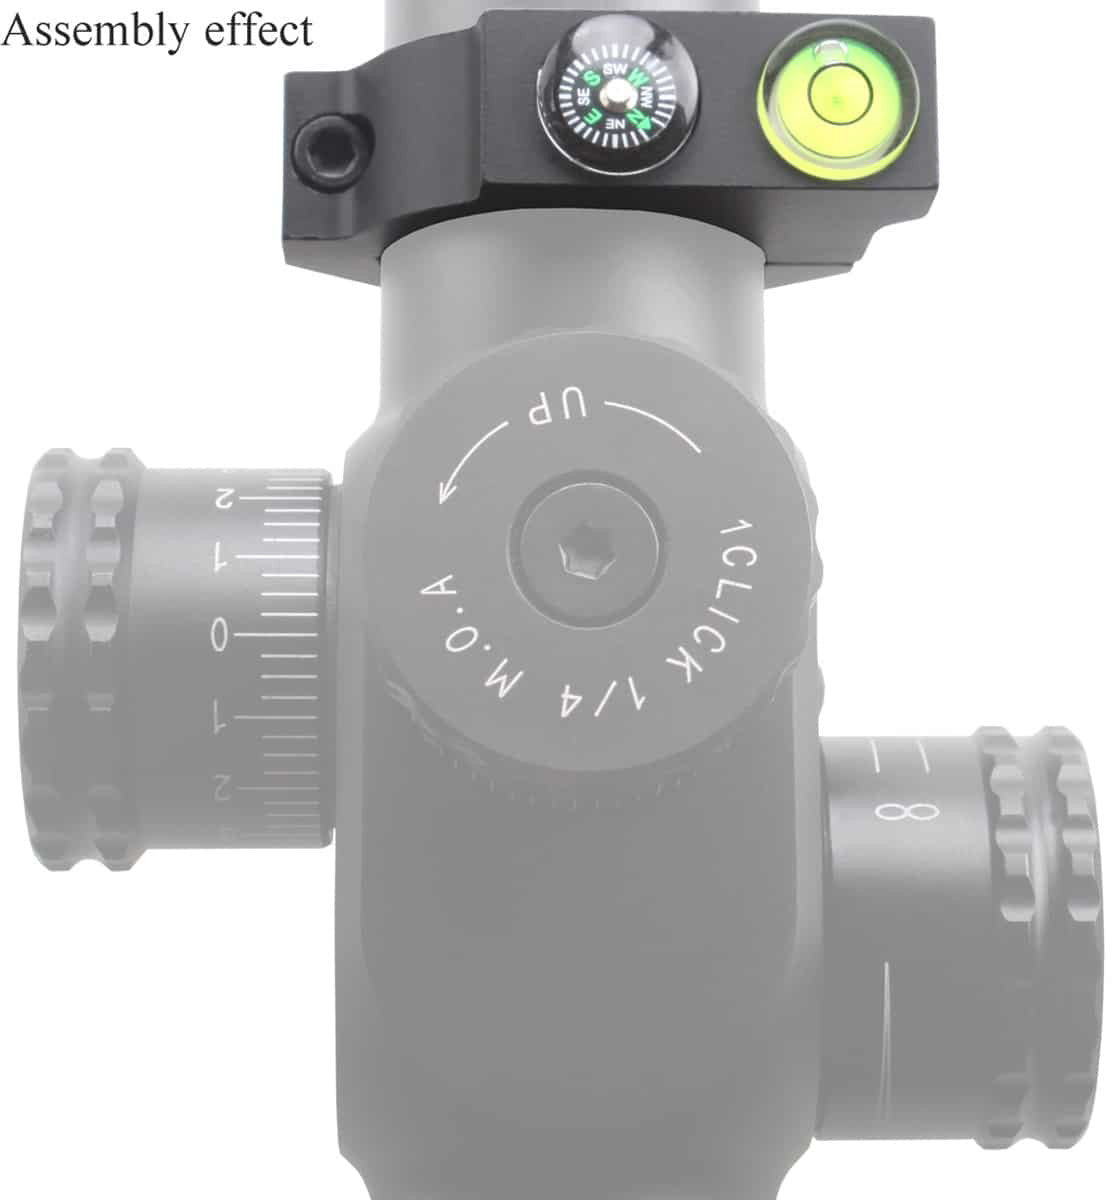 30mm Offest Bubble ACD Mount with Compass 4